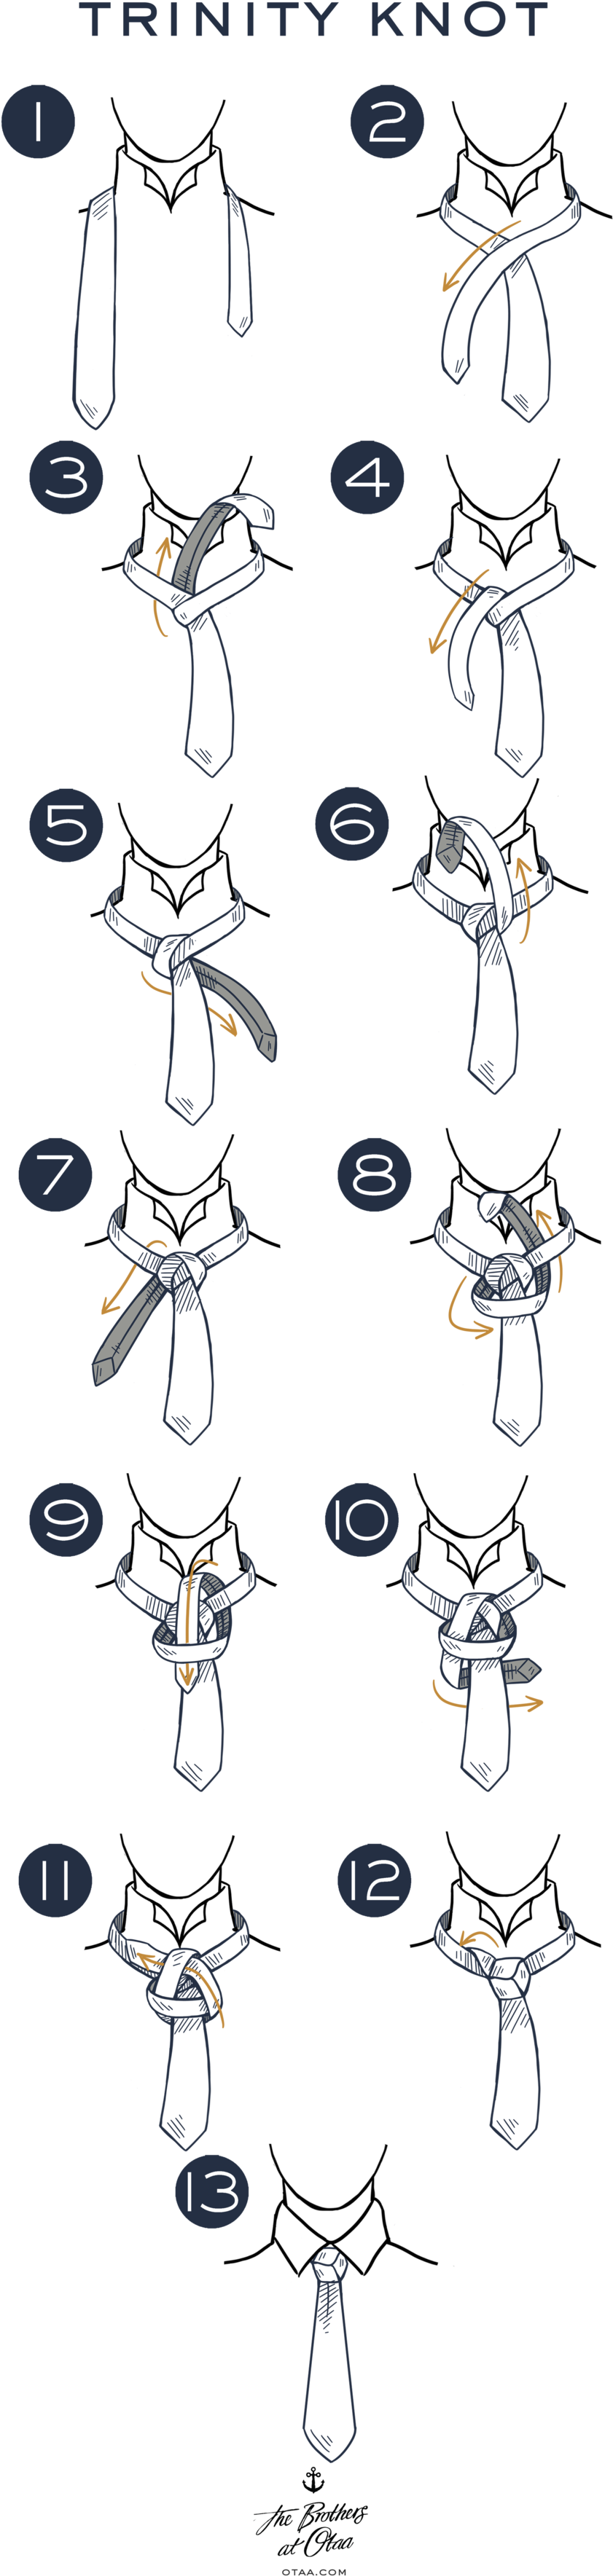 Trinity Knot Tying Guide PNG